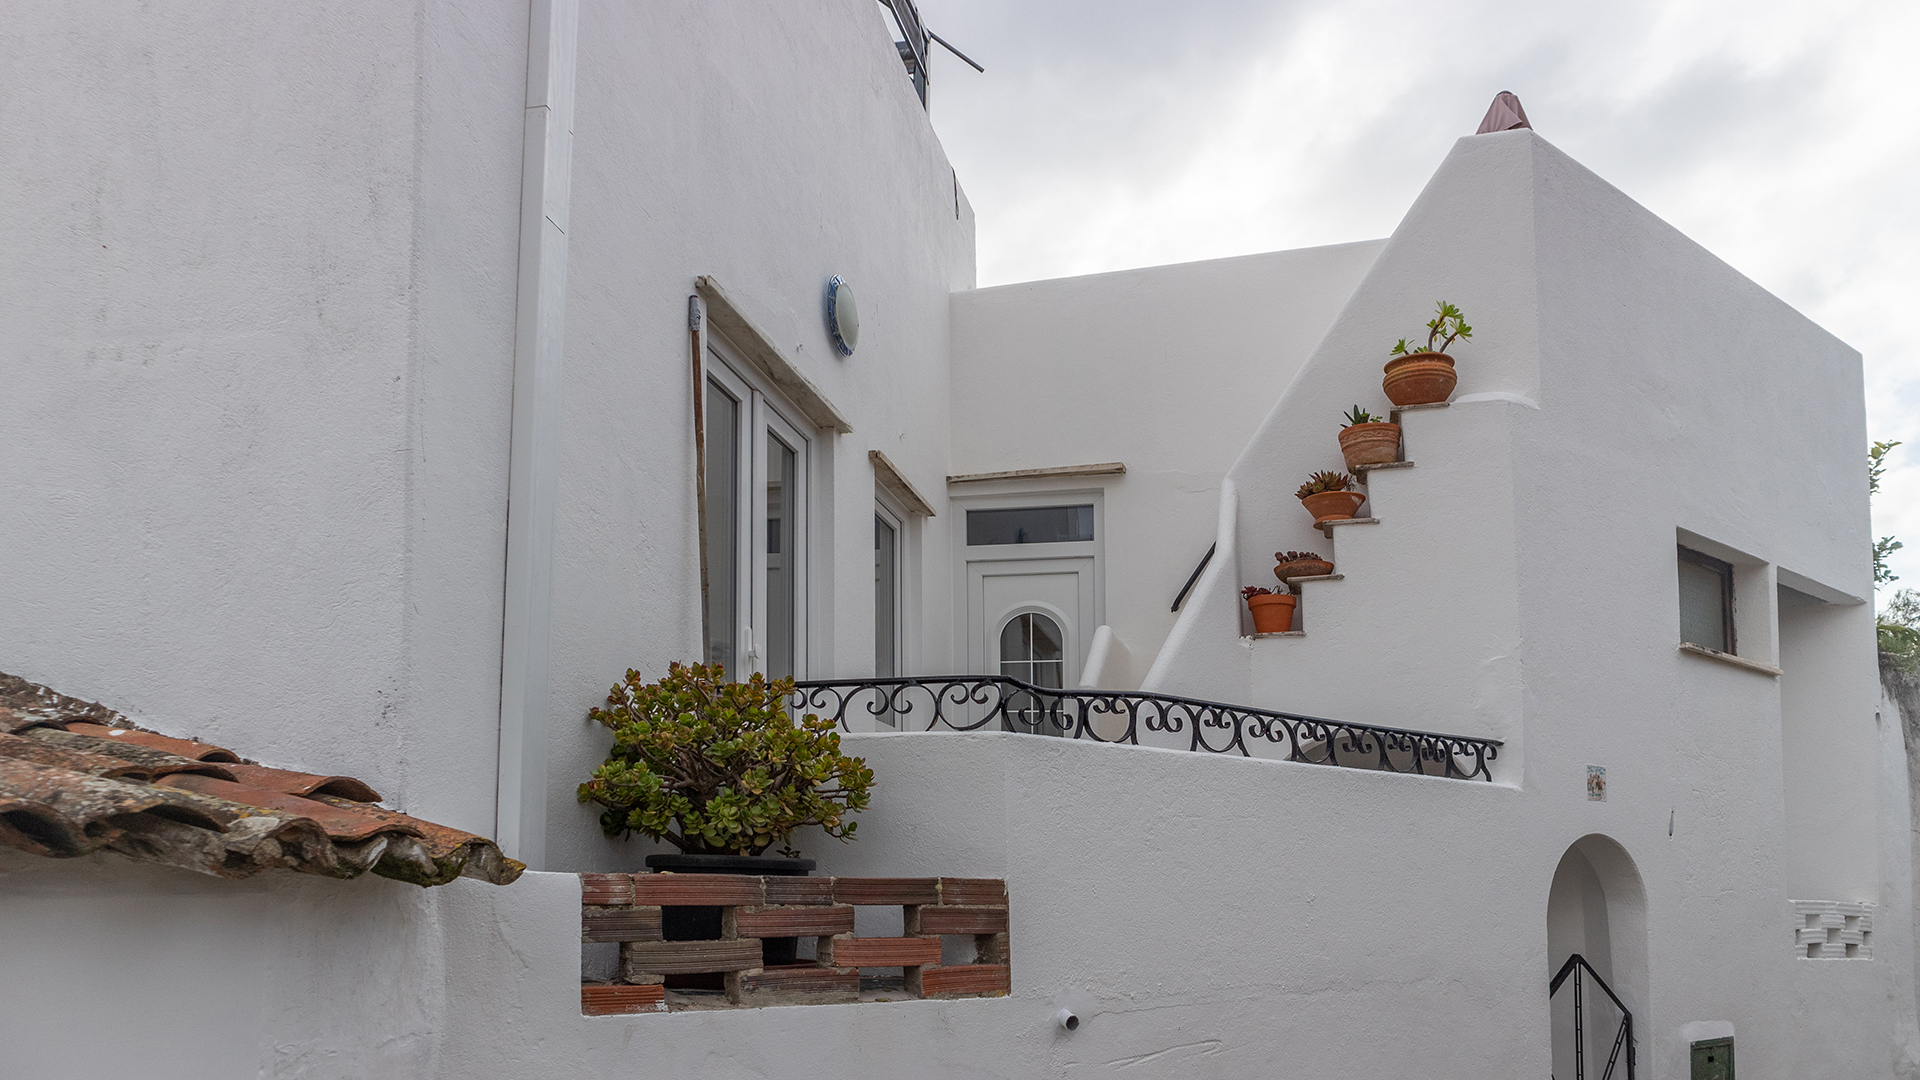 Townhouse and annex with views in hamlet near Monchique  | LG2002 Excellent opportunity to own a renovated two to three bedroom house plus large open plan studio apartment with fantastic views to the distant sea from a huge roof terrace garden.